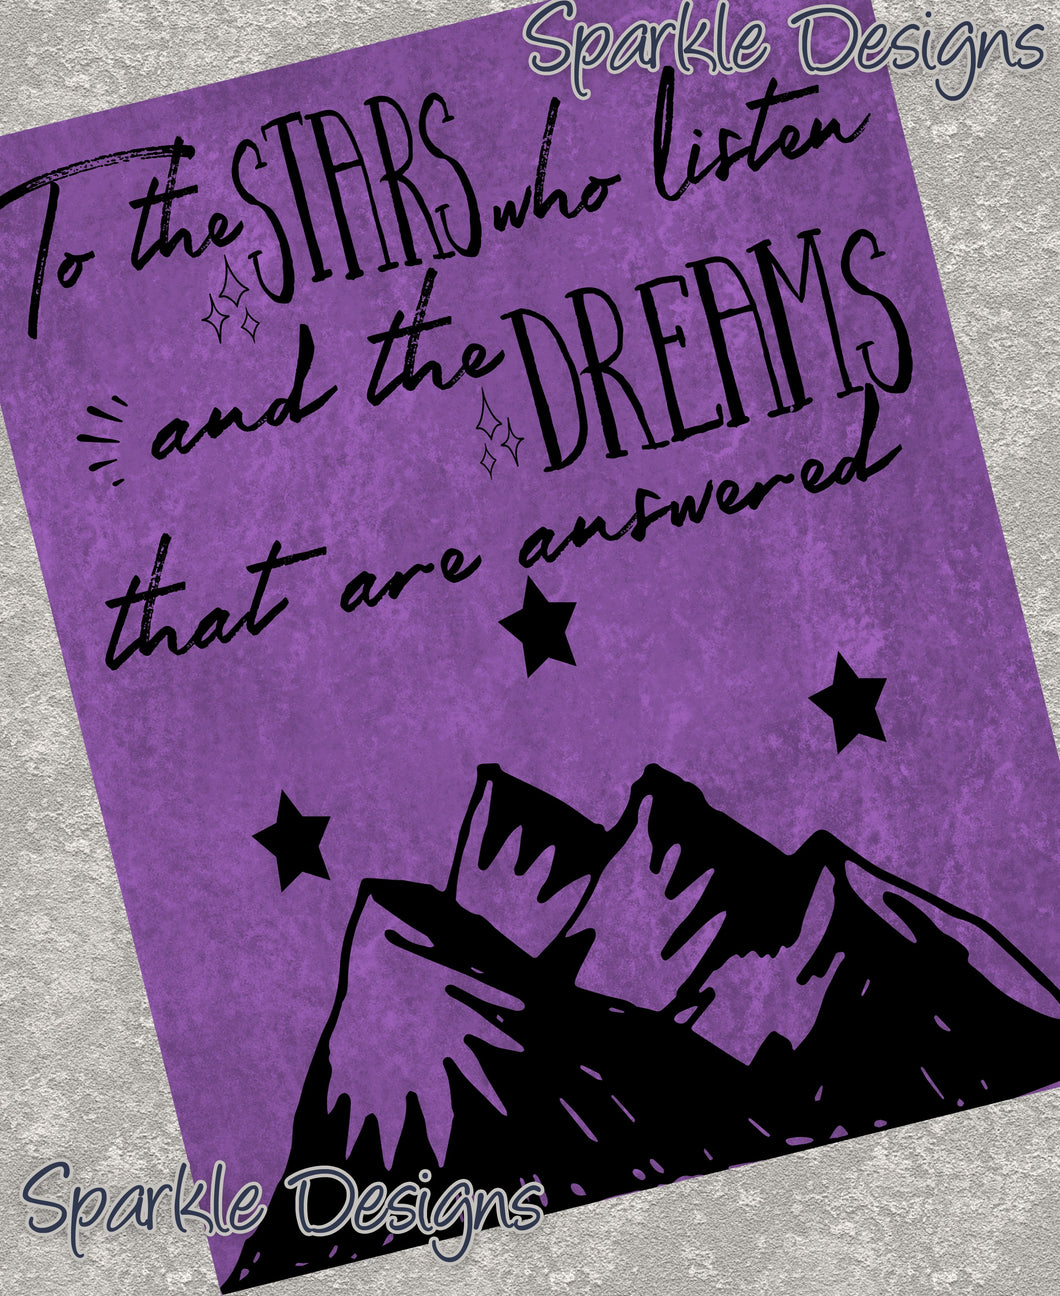 To the stars who listen and the dreams… - 161 wood Print